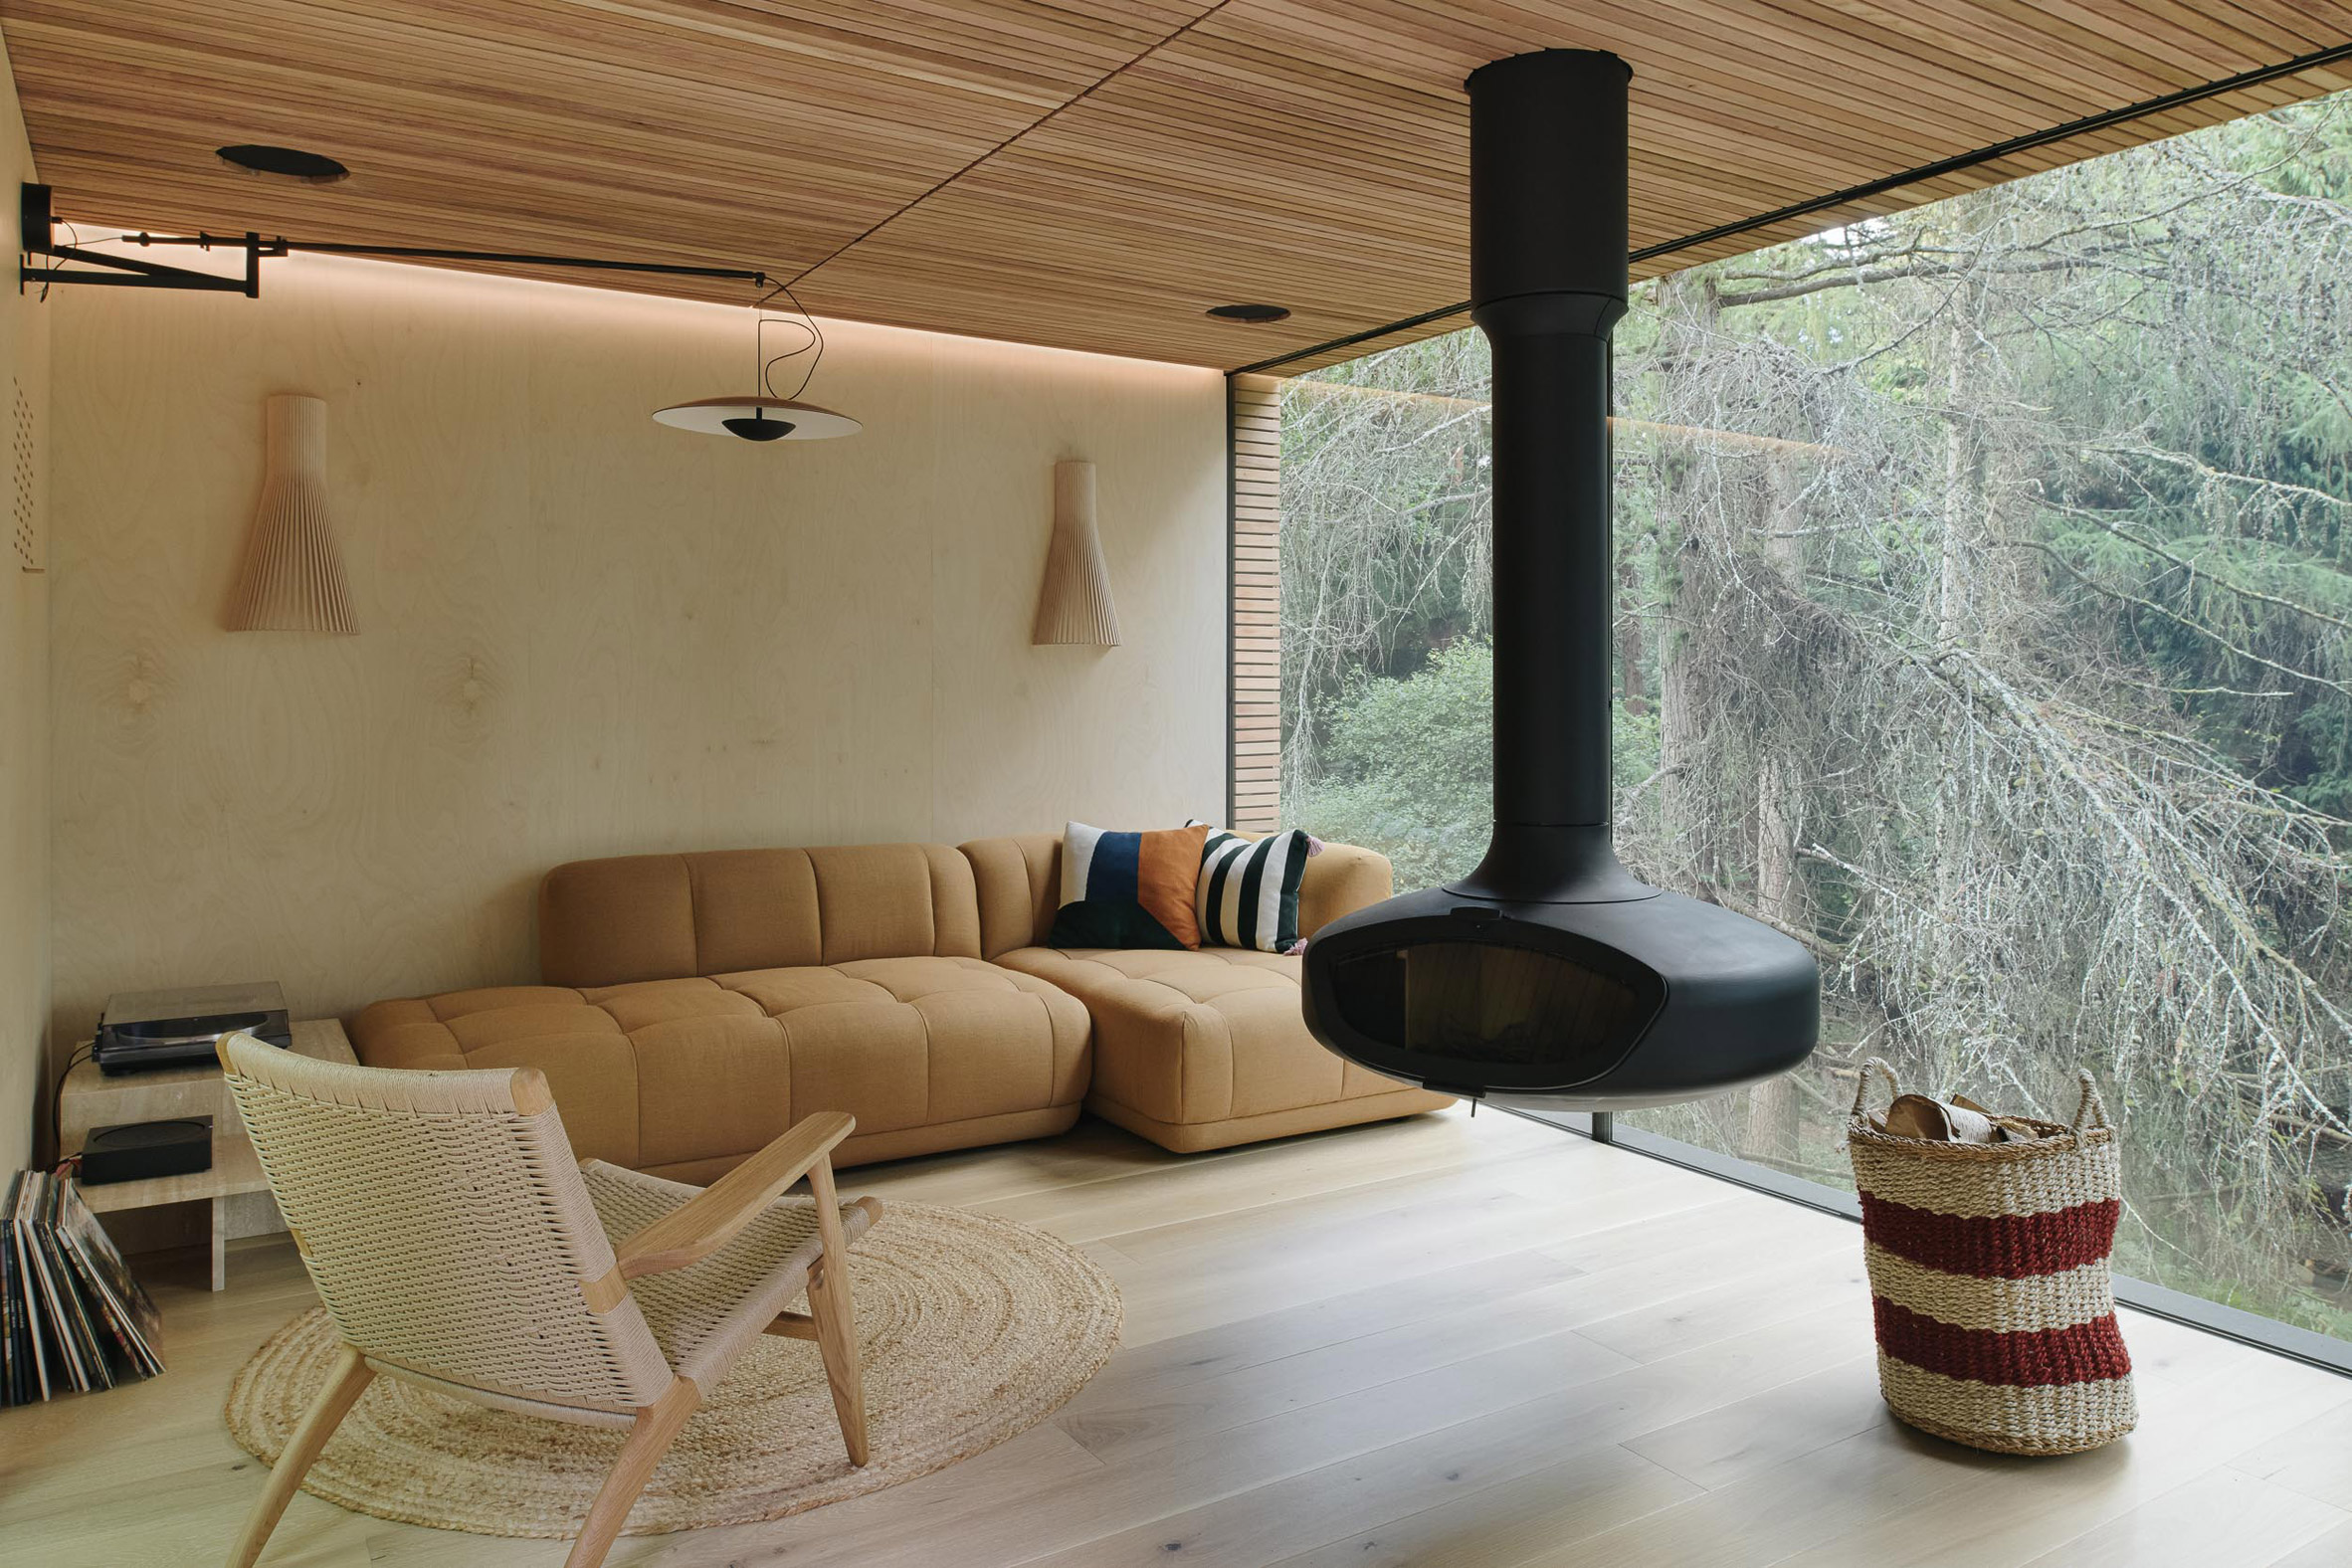 L-shaped sofa and armchair inside cabin living space